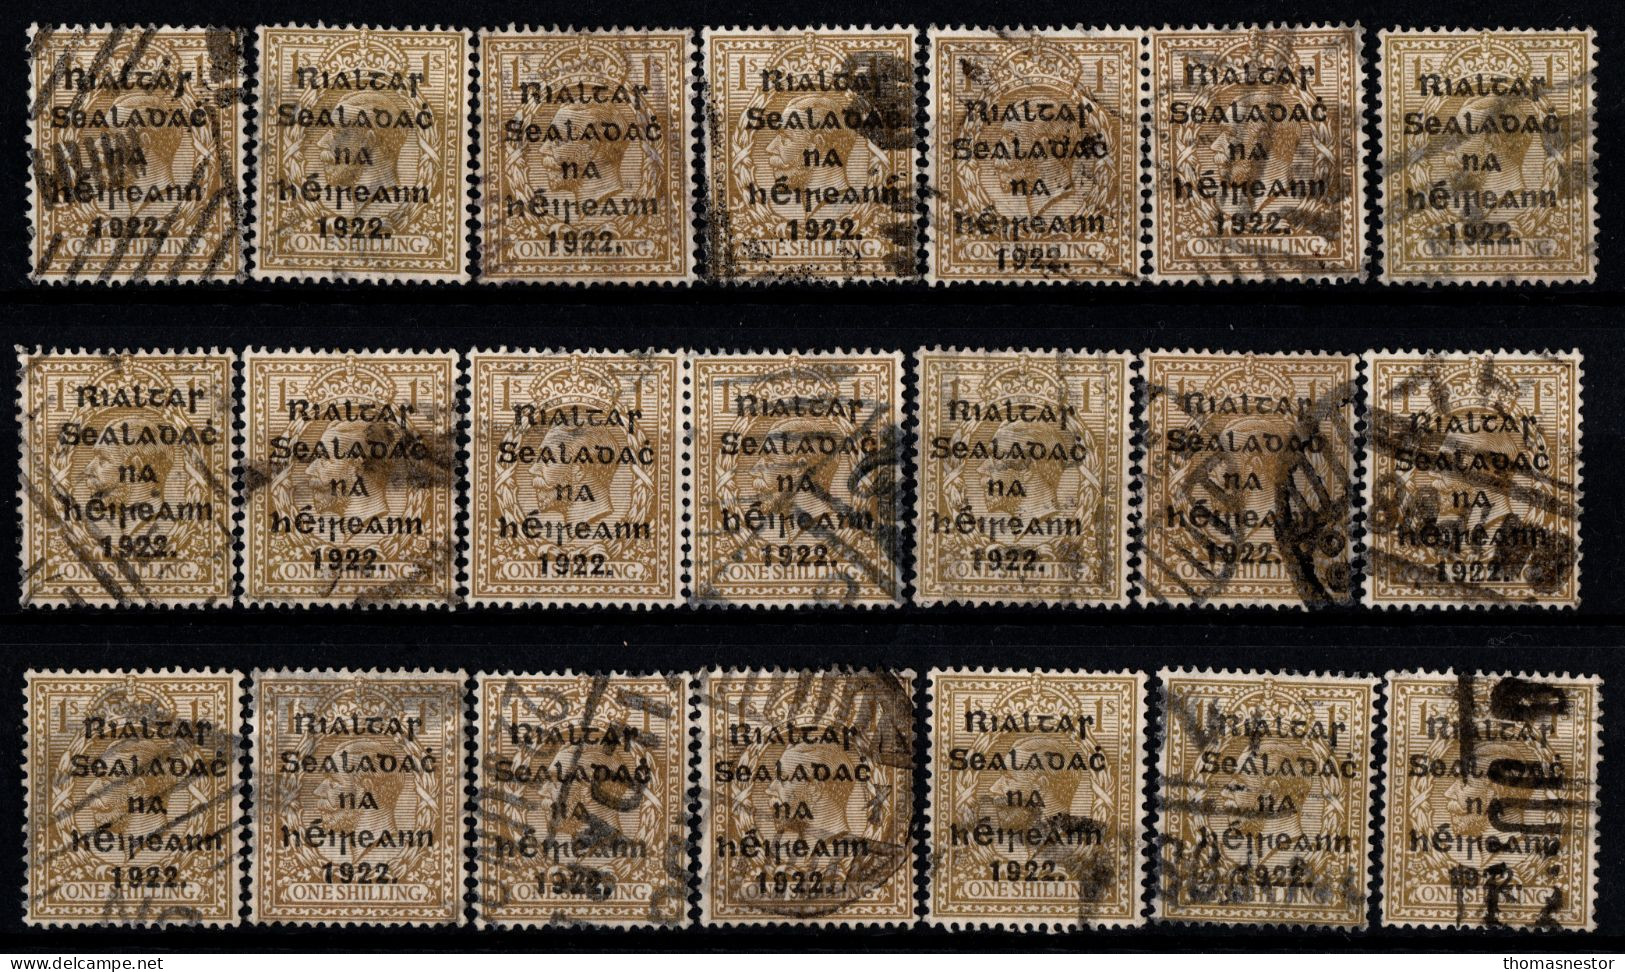 1922 Thom Rialtas 5 line in Black Ink, with Fiscal cancellation, parcel post and commercial cancel 132 stamps in total.